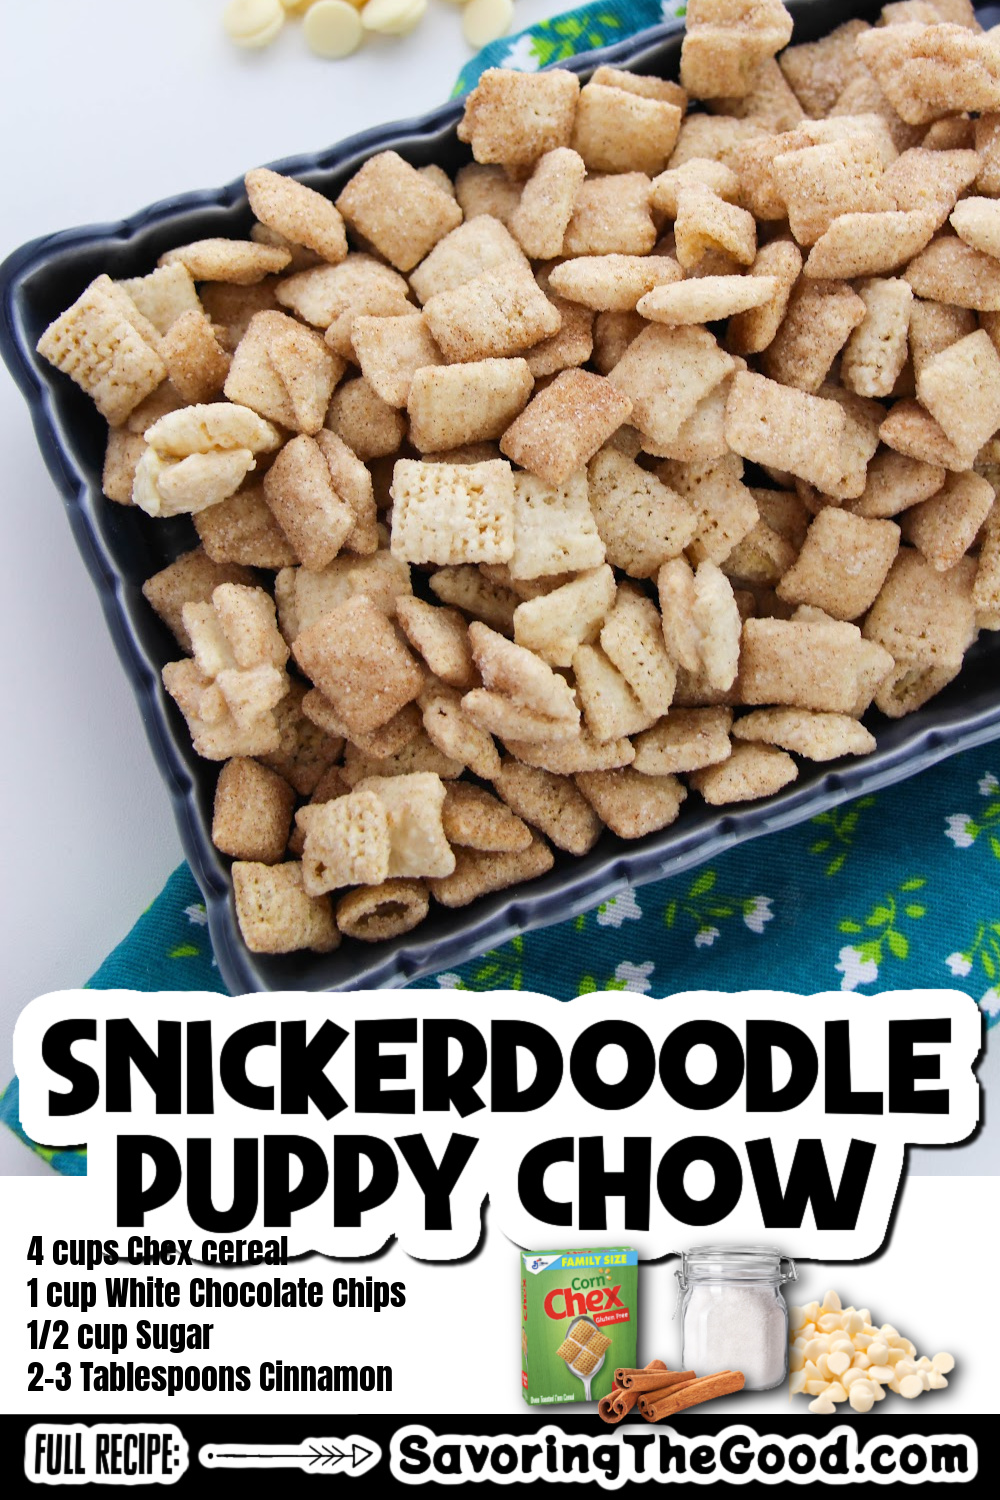 Snickerdoodle puppy chow is on a tray.